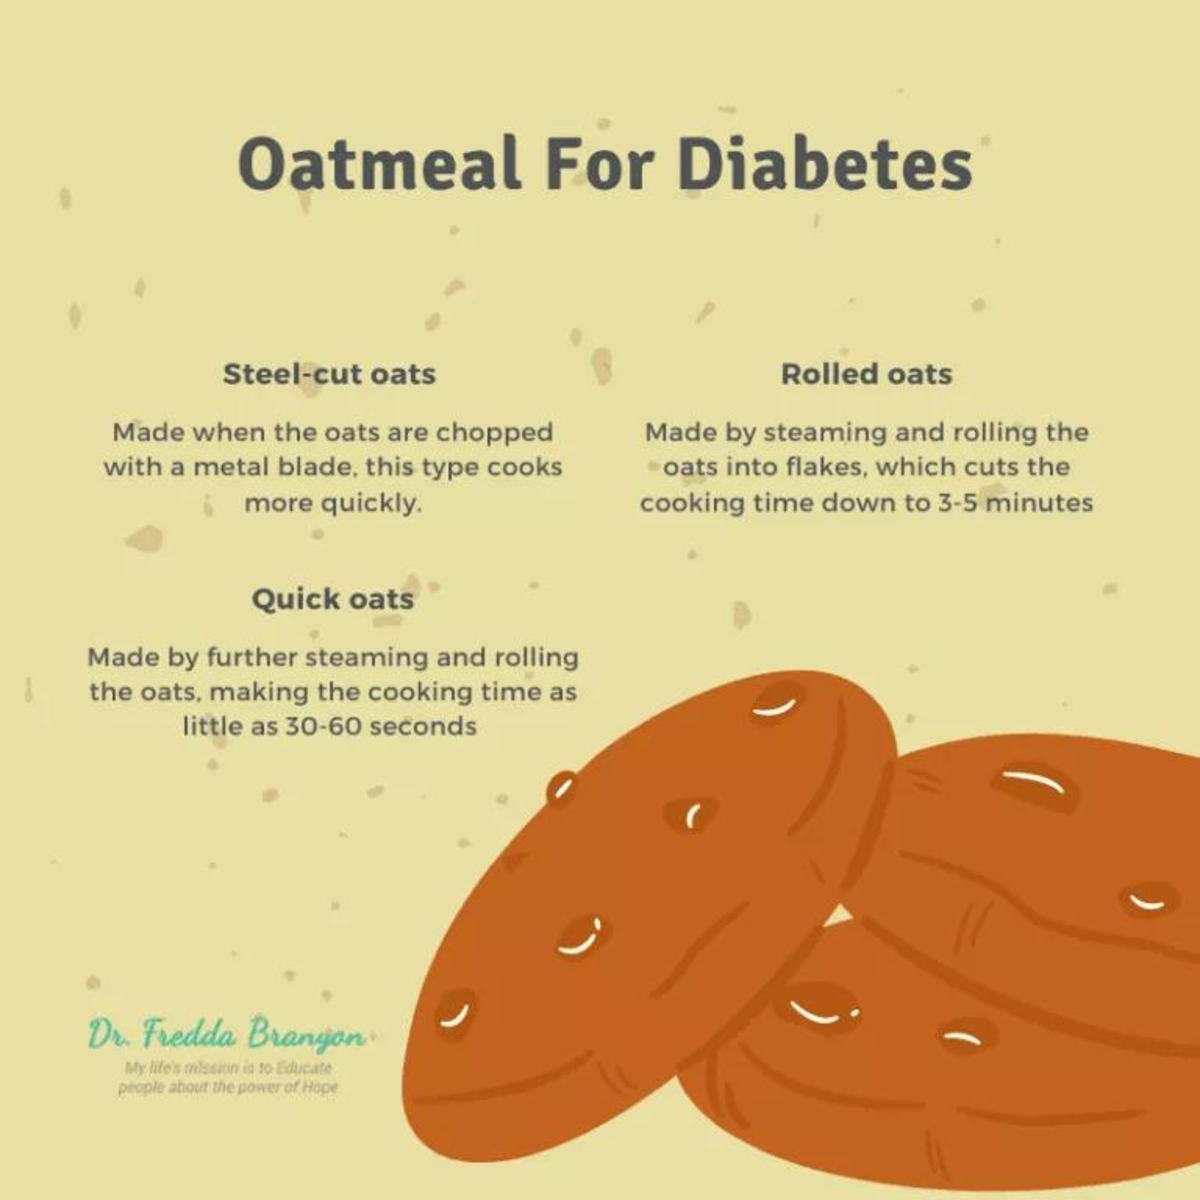 Oatmeal For Diabetes: What You Need To Know